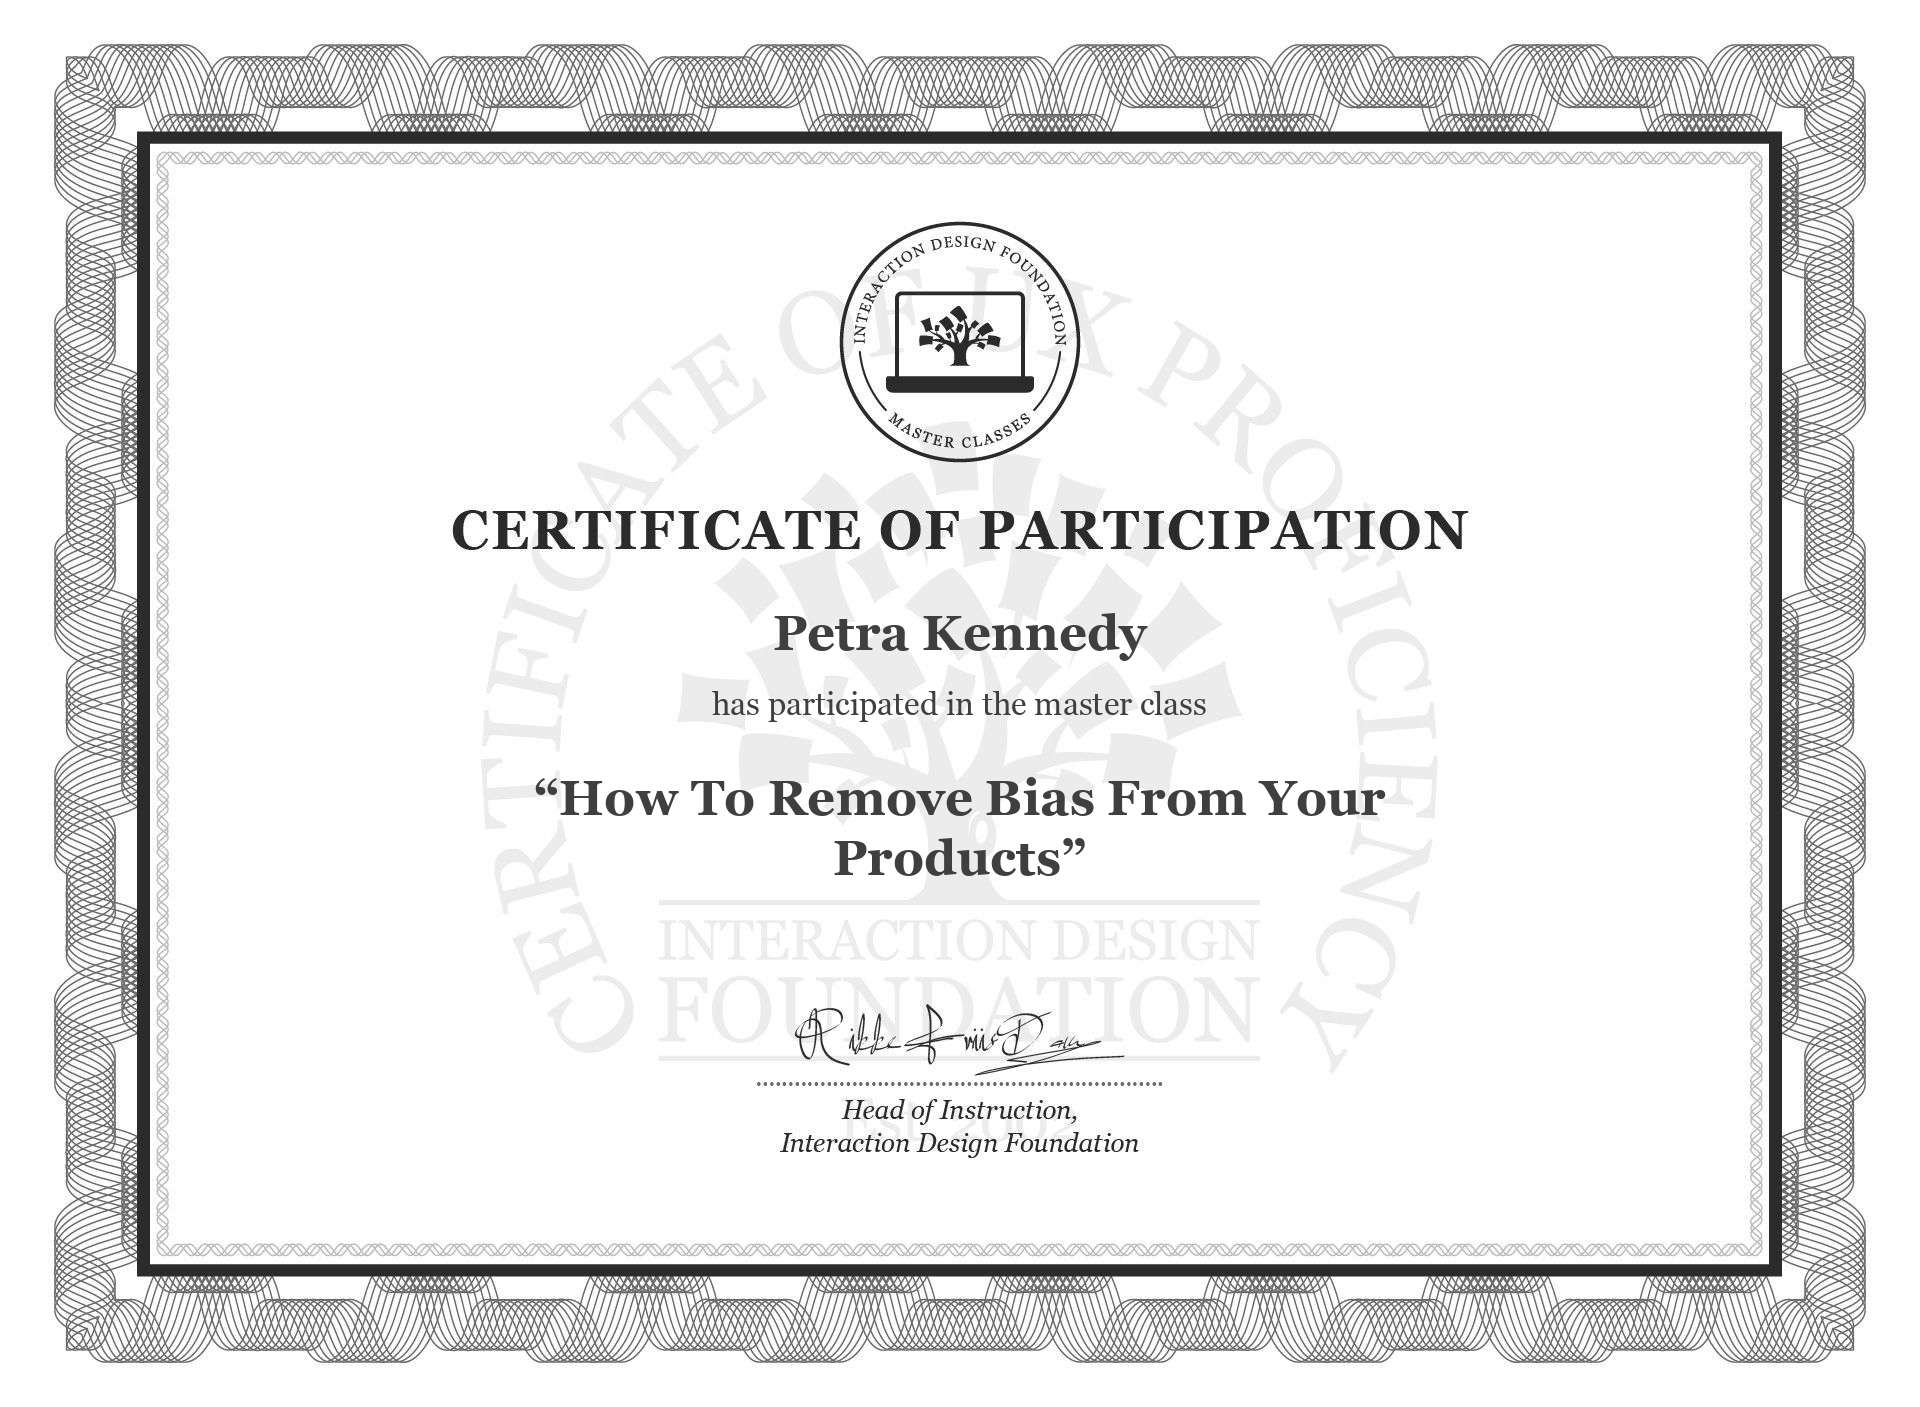 Masterclass Certificate How To Remove Bias From Your Products